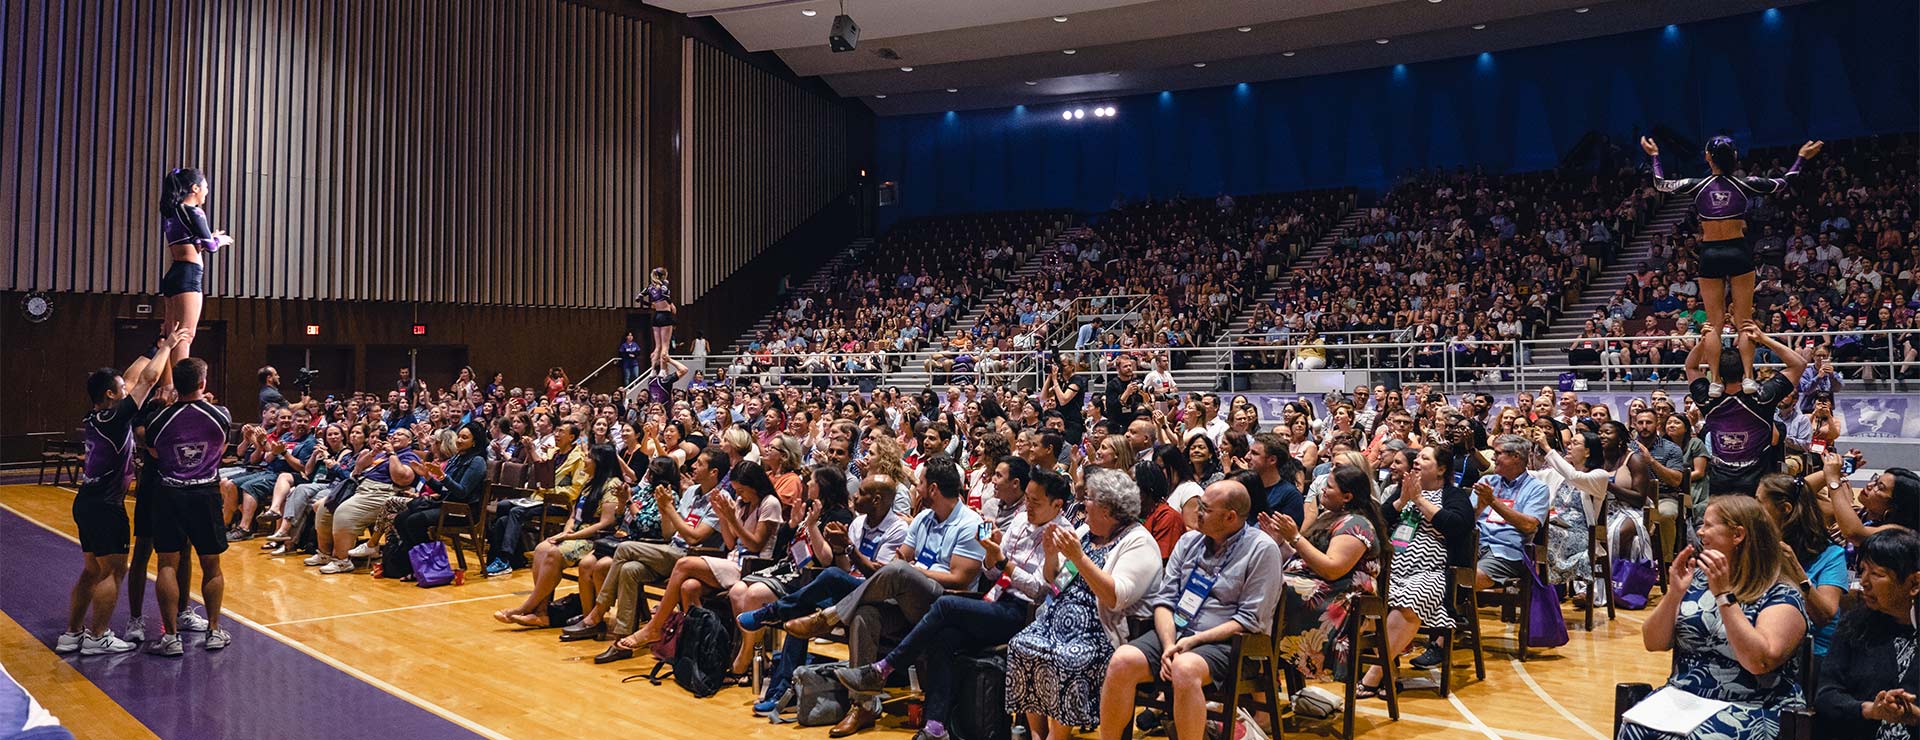 Audience in auditorium during the International ACAC Conference in 2019